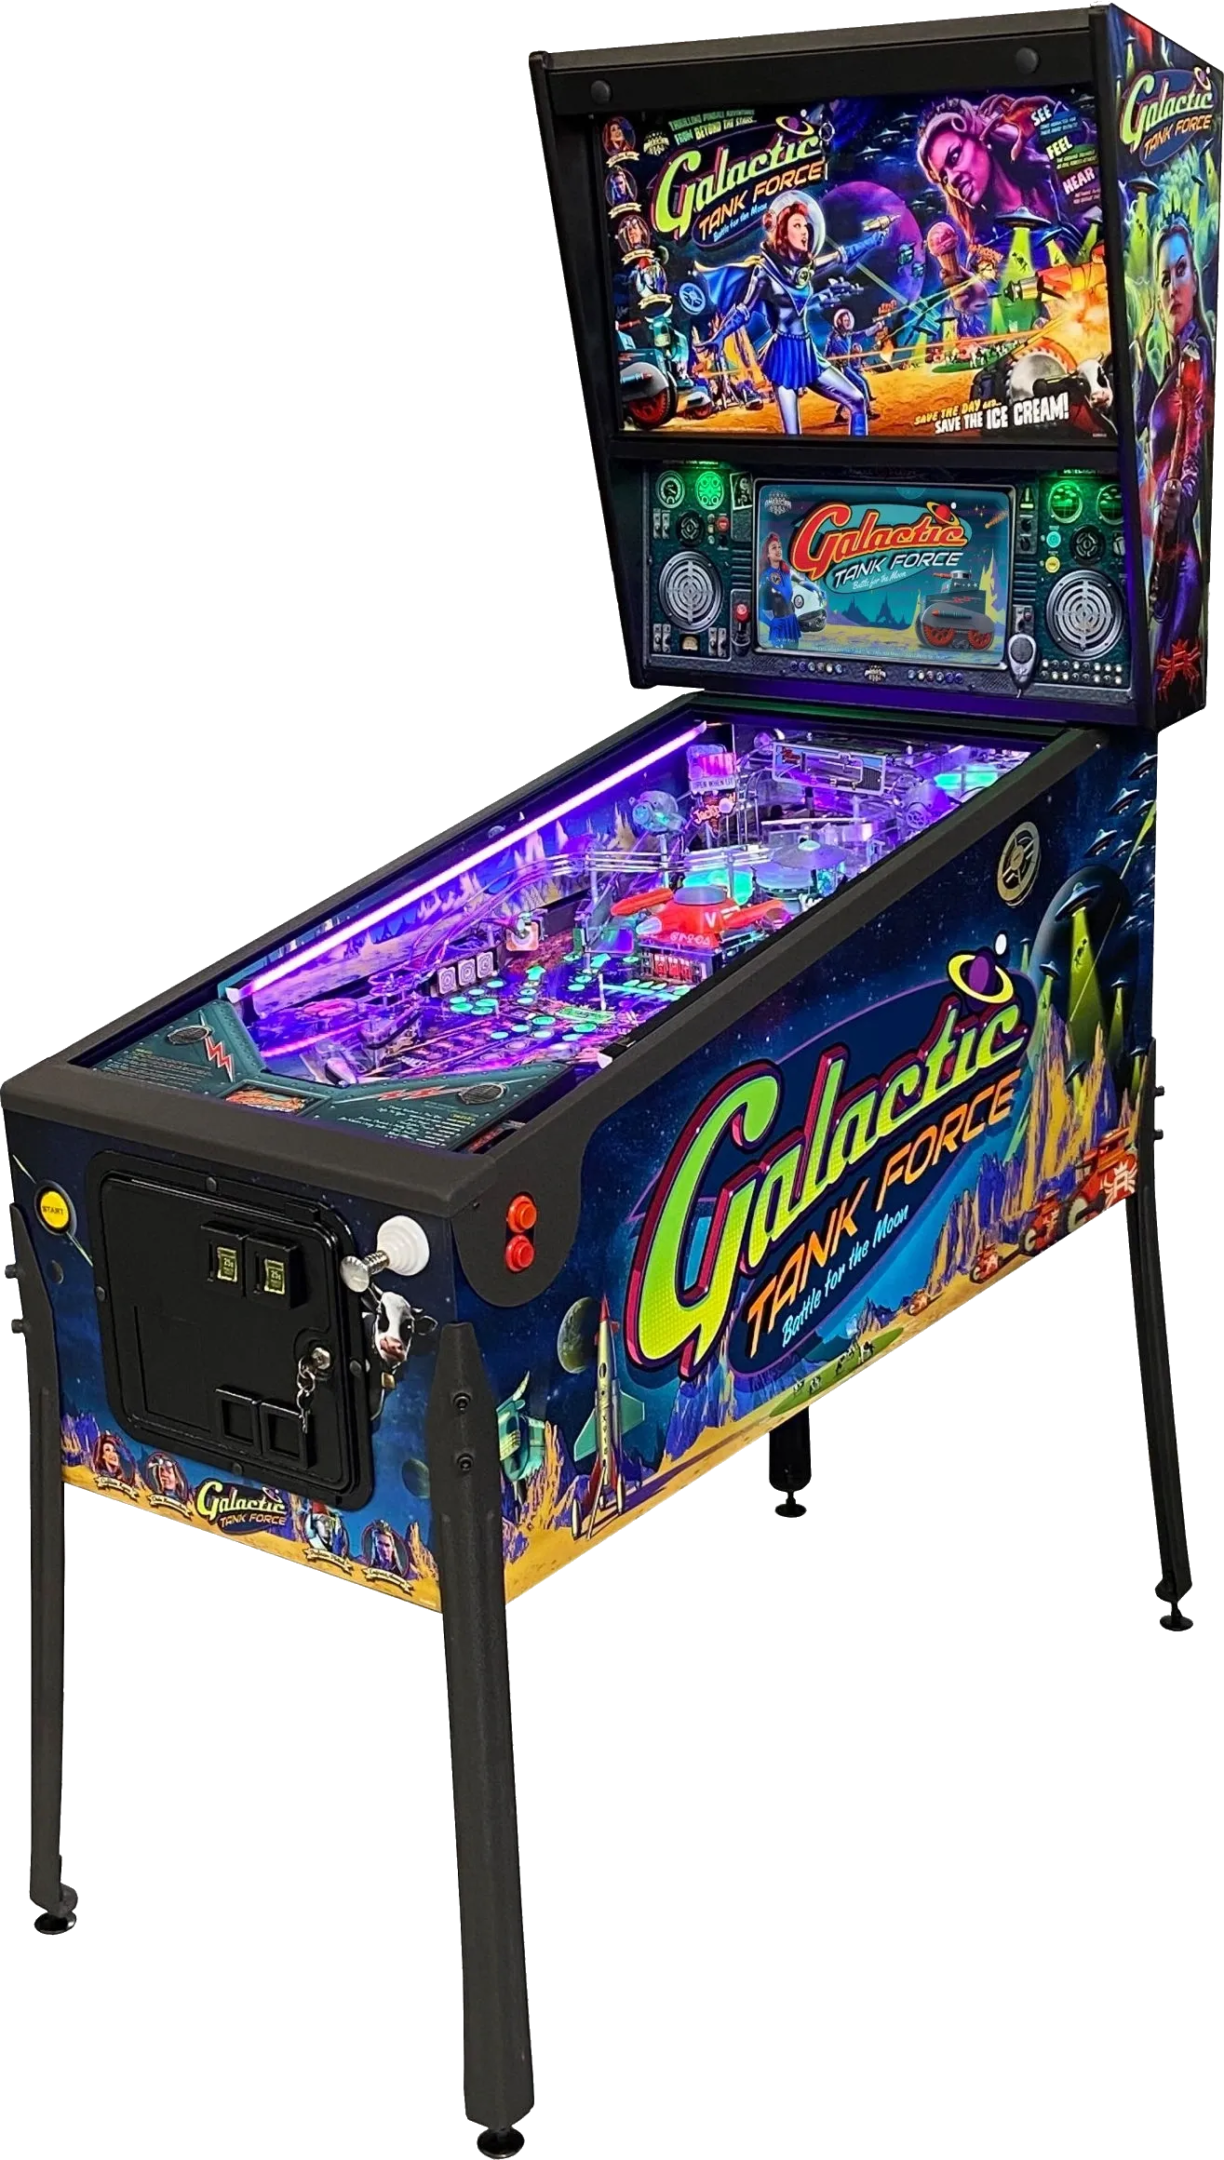 A pinball machine with lights and a black background